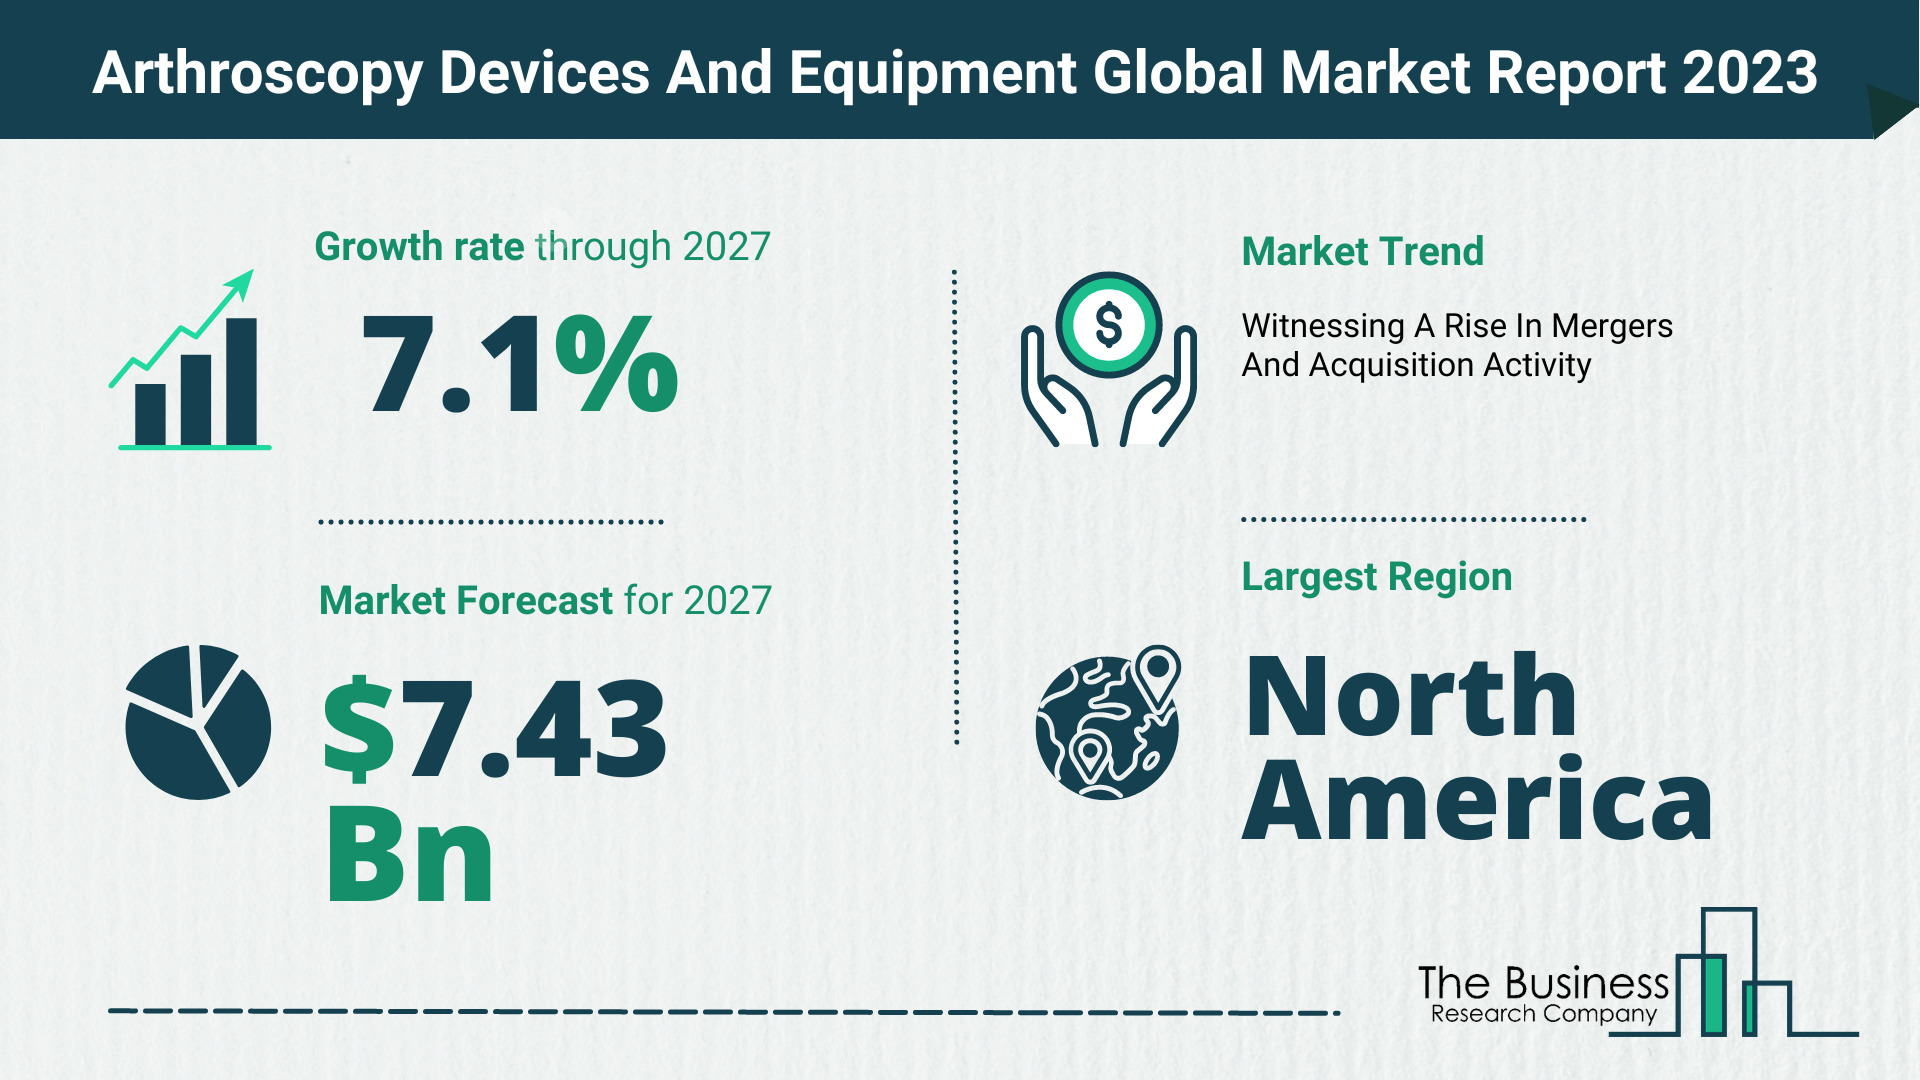 Global Arthroscopy Devices And Equipment Market